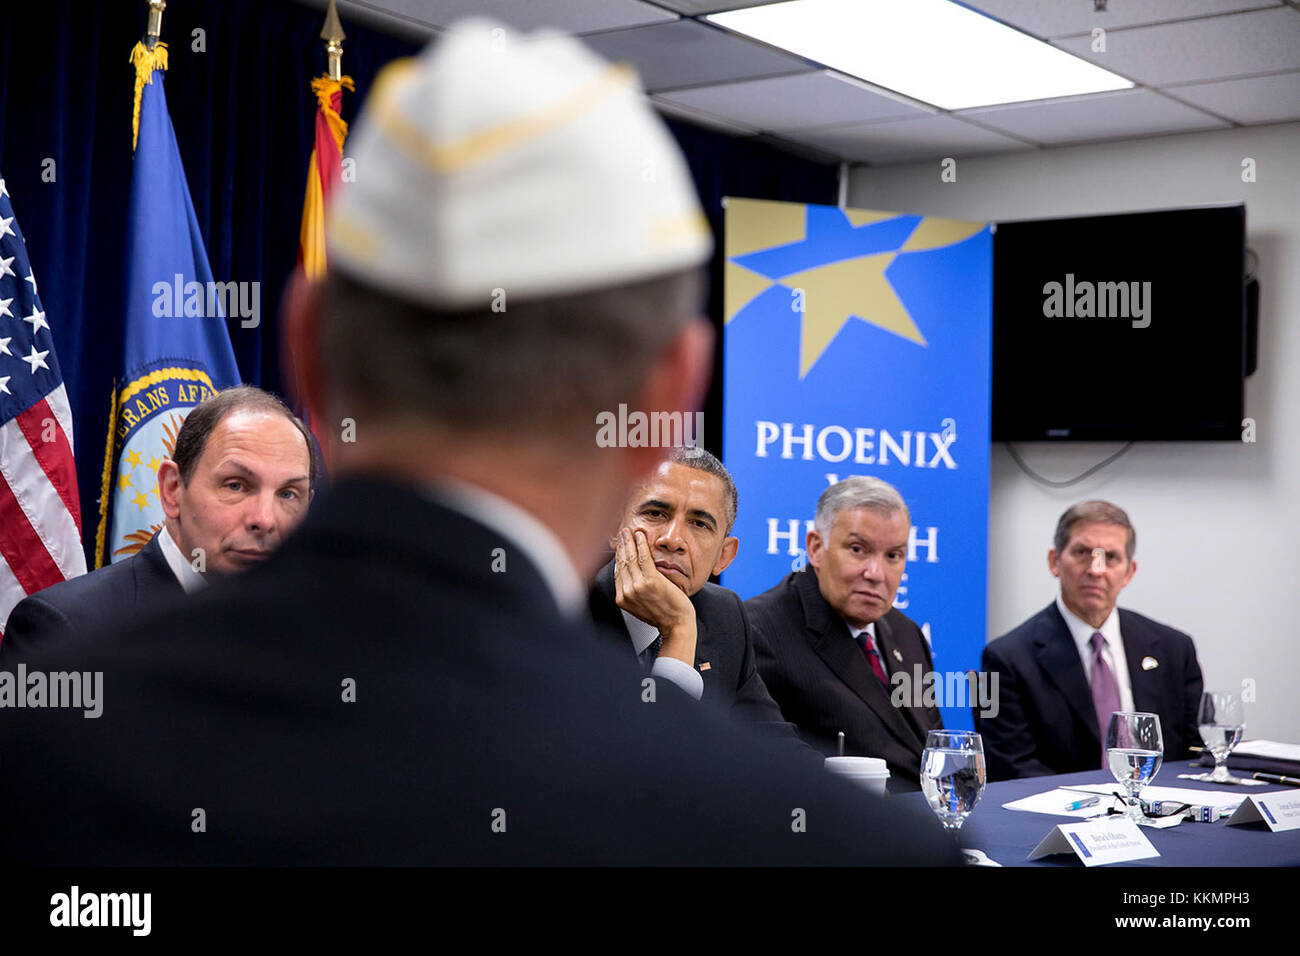 President Barack Obama and Veterans Affairs Secretary Robert A. McDonald, left, meet with veterans, VA employees and representatives from veterans groups for a briefing on the progress made to improve the Department of Veterans Affairs' ability to serve veterans in a timely and effective manner, at the Phoenix VA Medical Center in Phoenix, Ariz., March 13, 2015. (Official White House Photo by Pete Souza)  This official White House photograph is being made available only for publication by news organizations and/or for personal use printing by the subject(s) of the photograph. The photograph ma Stock Photo